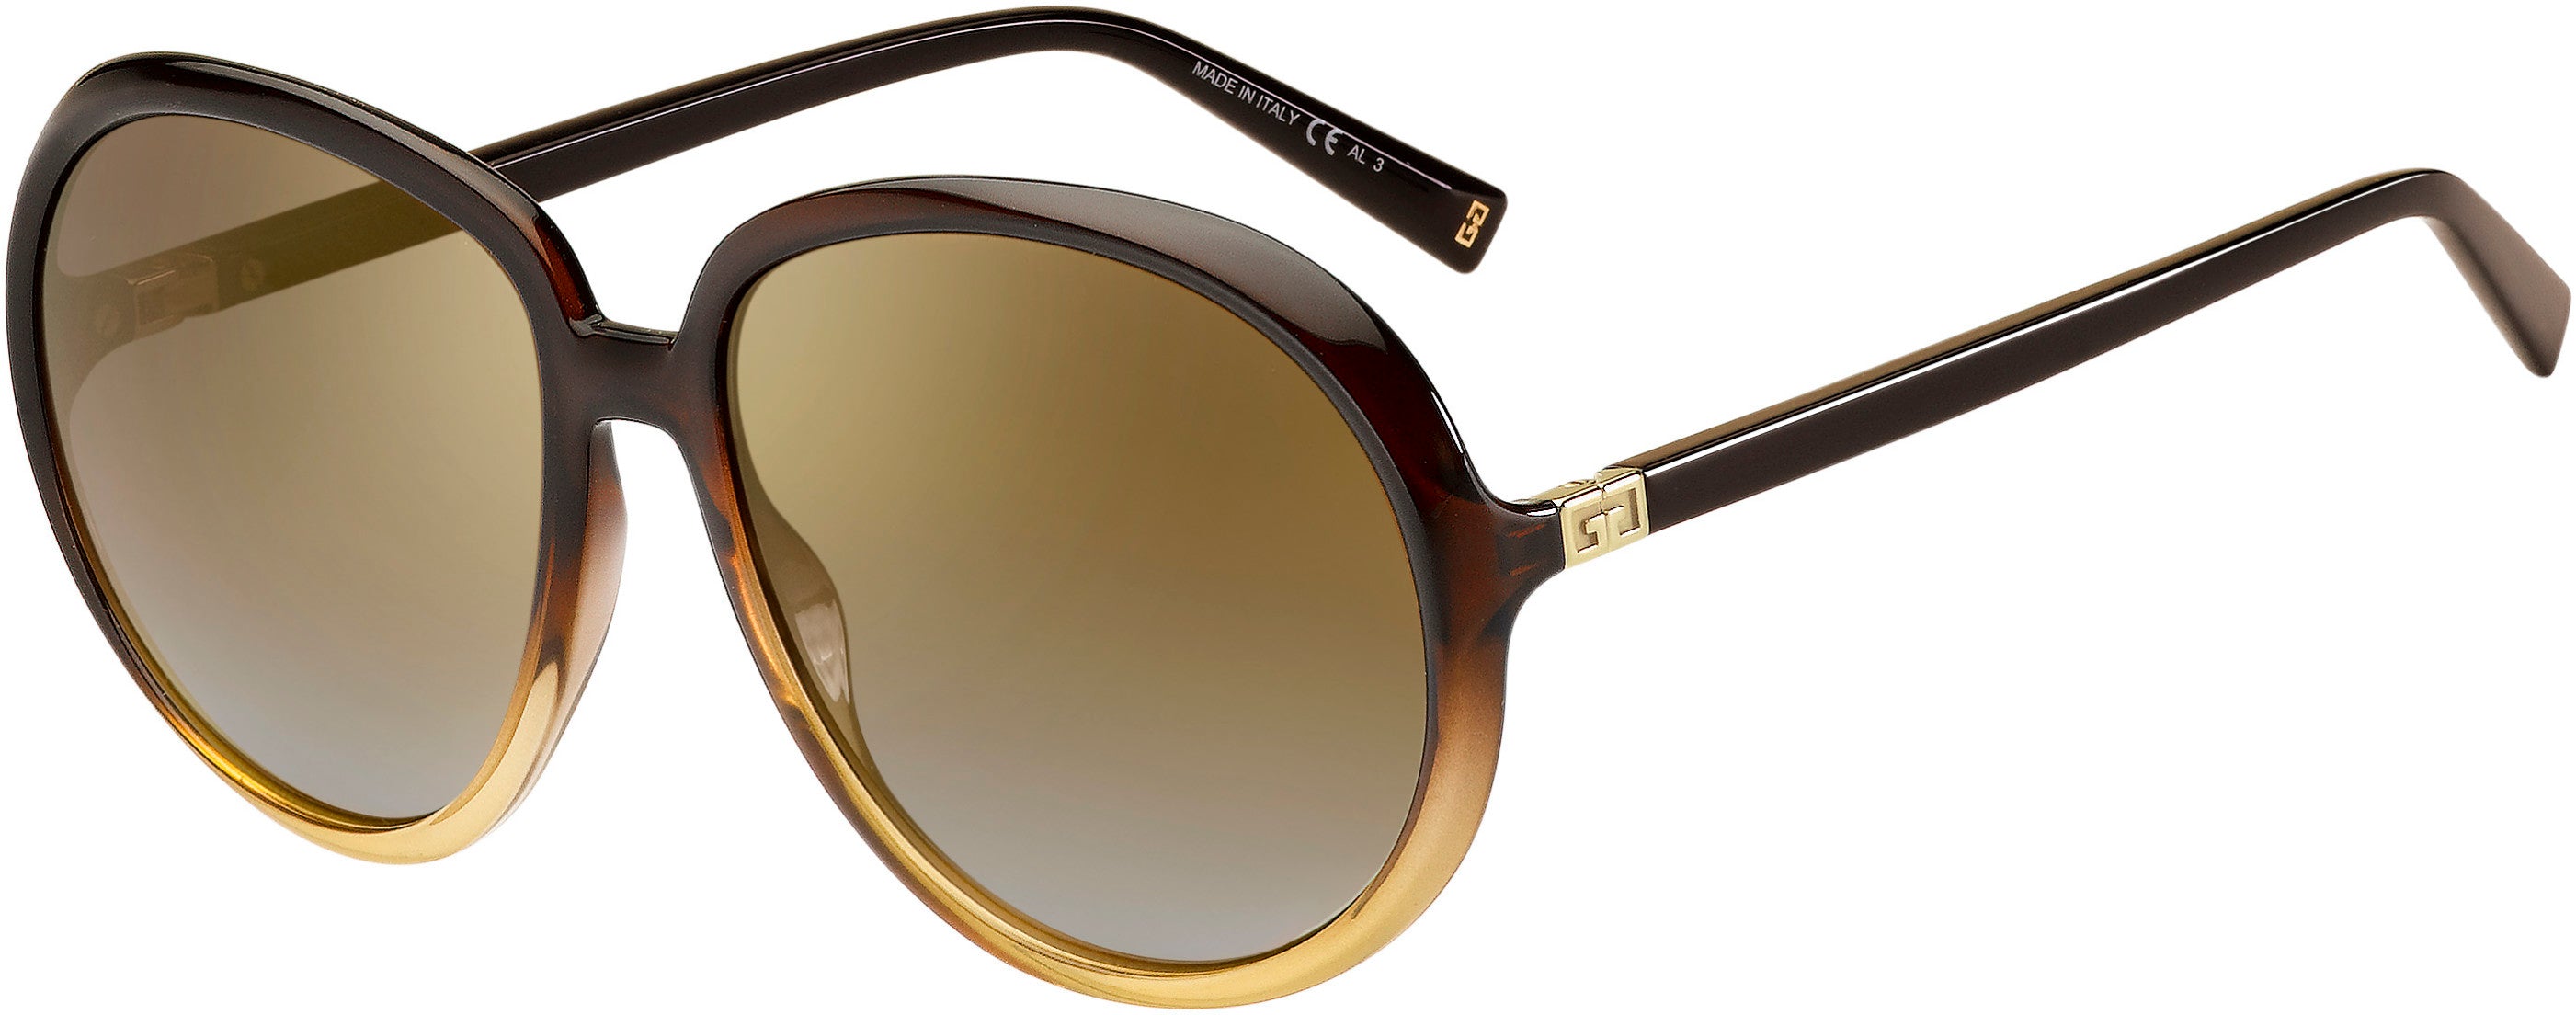  Givenchy 7180/S Oval Modified Sunglasses 0GLN-0GLN  Brown Yellow (JL Brown Ss Gold)